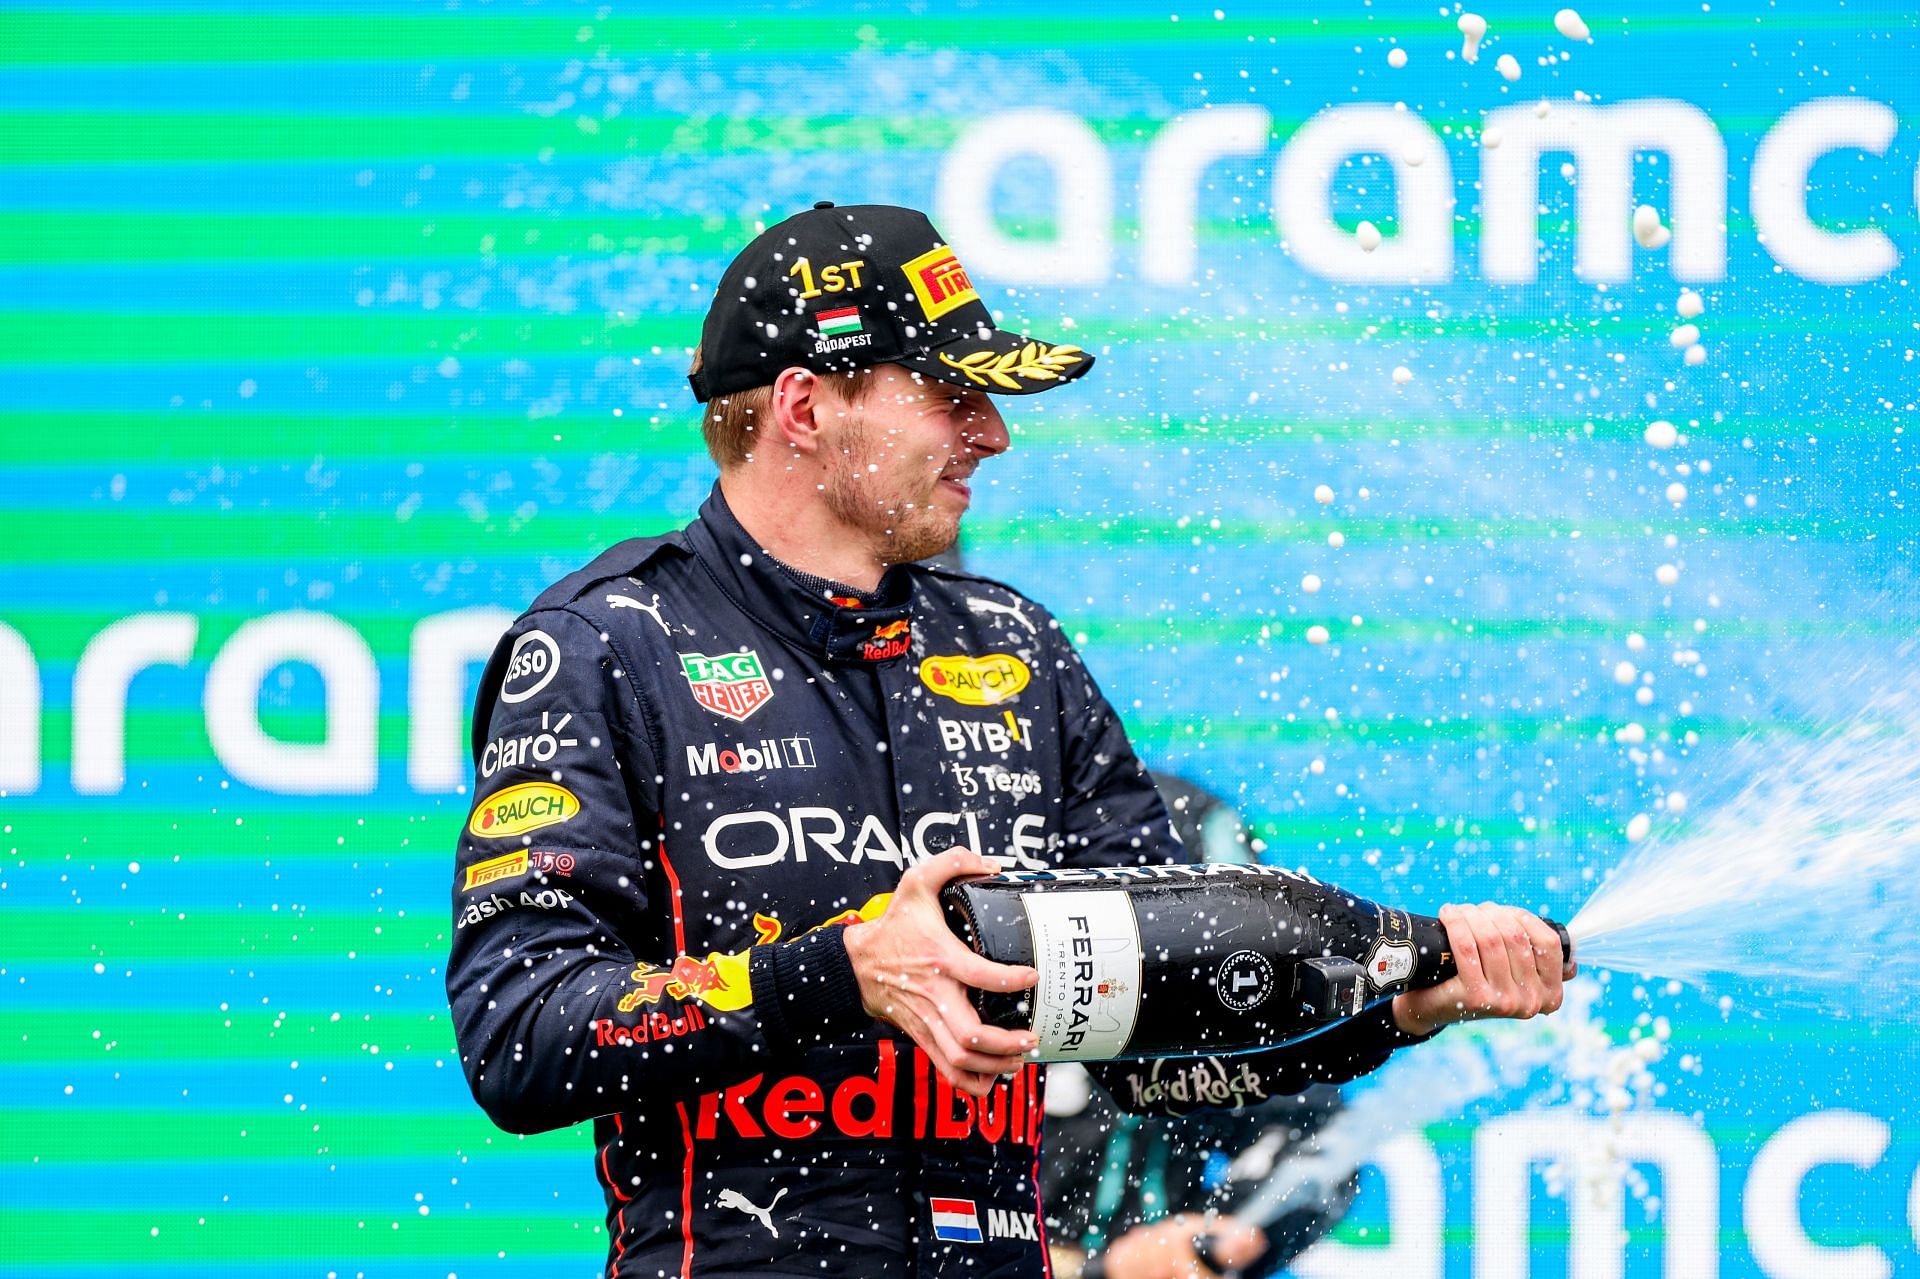 Max Verstappen celebrates finishing in first position during the F1 Grand Prix of Hungary. (Photo by Peter Fox/Getty Images)